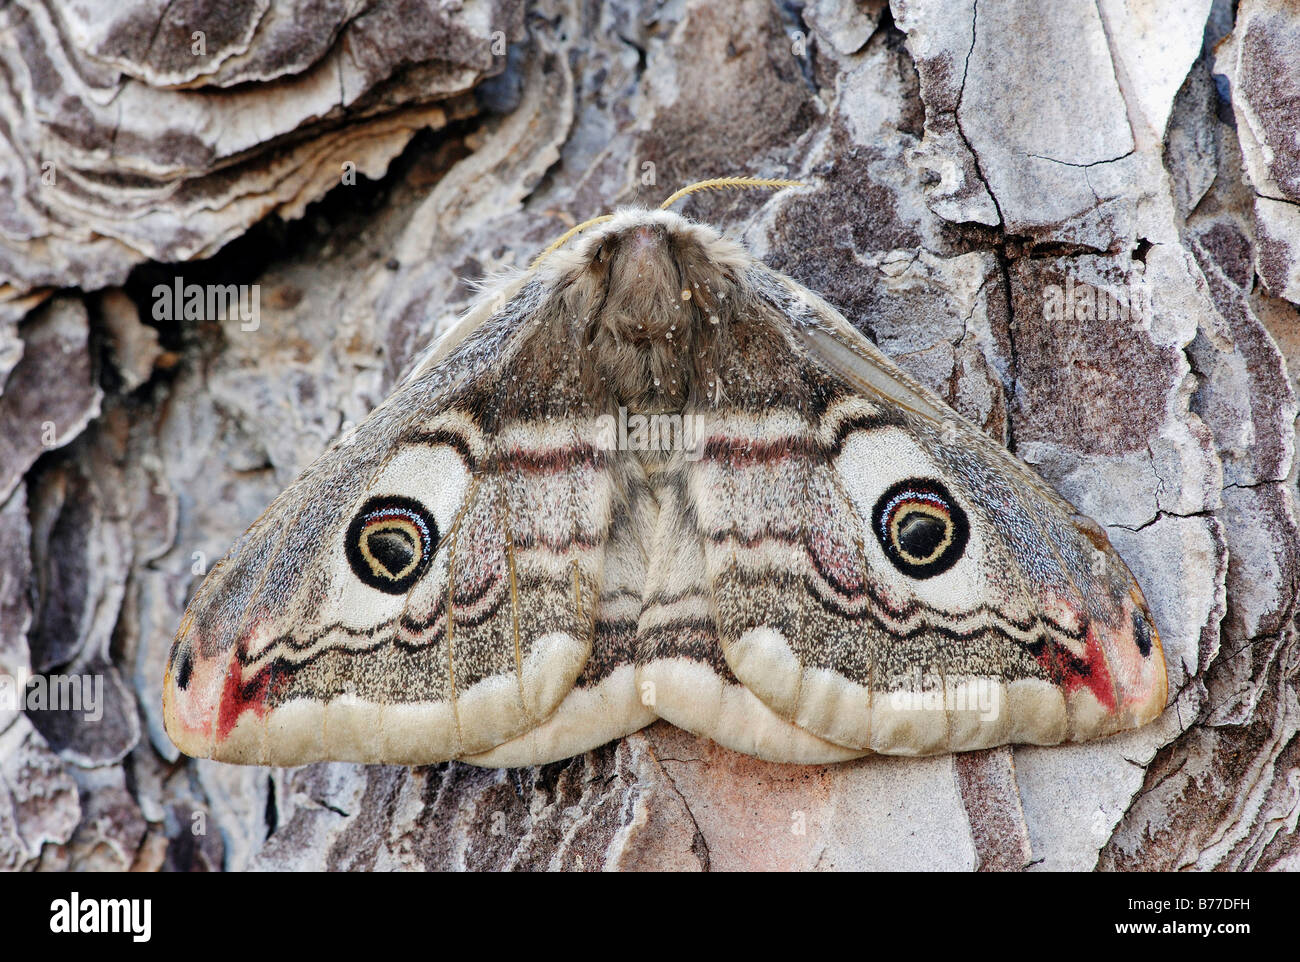 Small Emperor Moth (Saturnia pavonia), female, Provence, South France, Europe Stock Photo